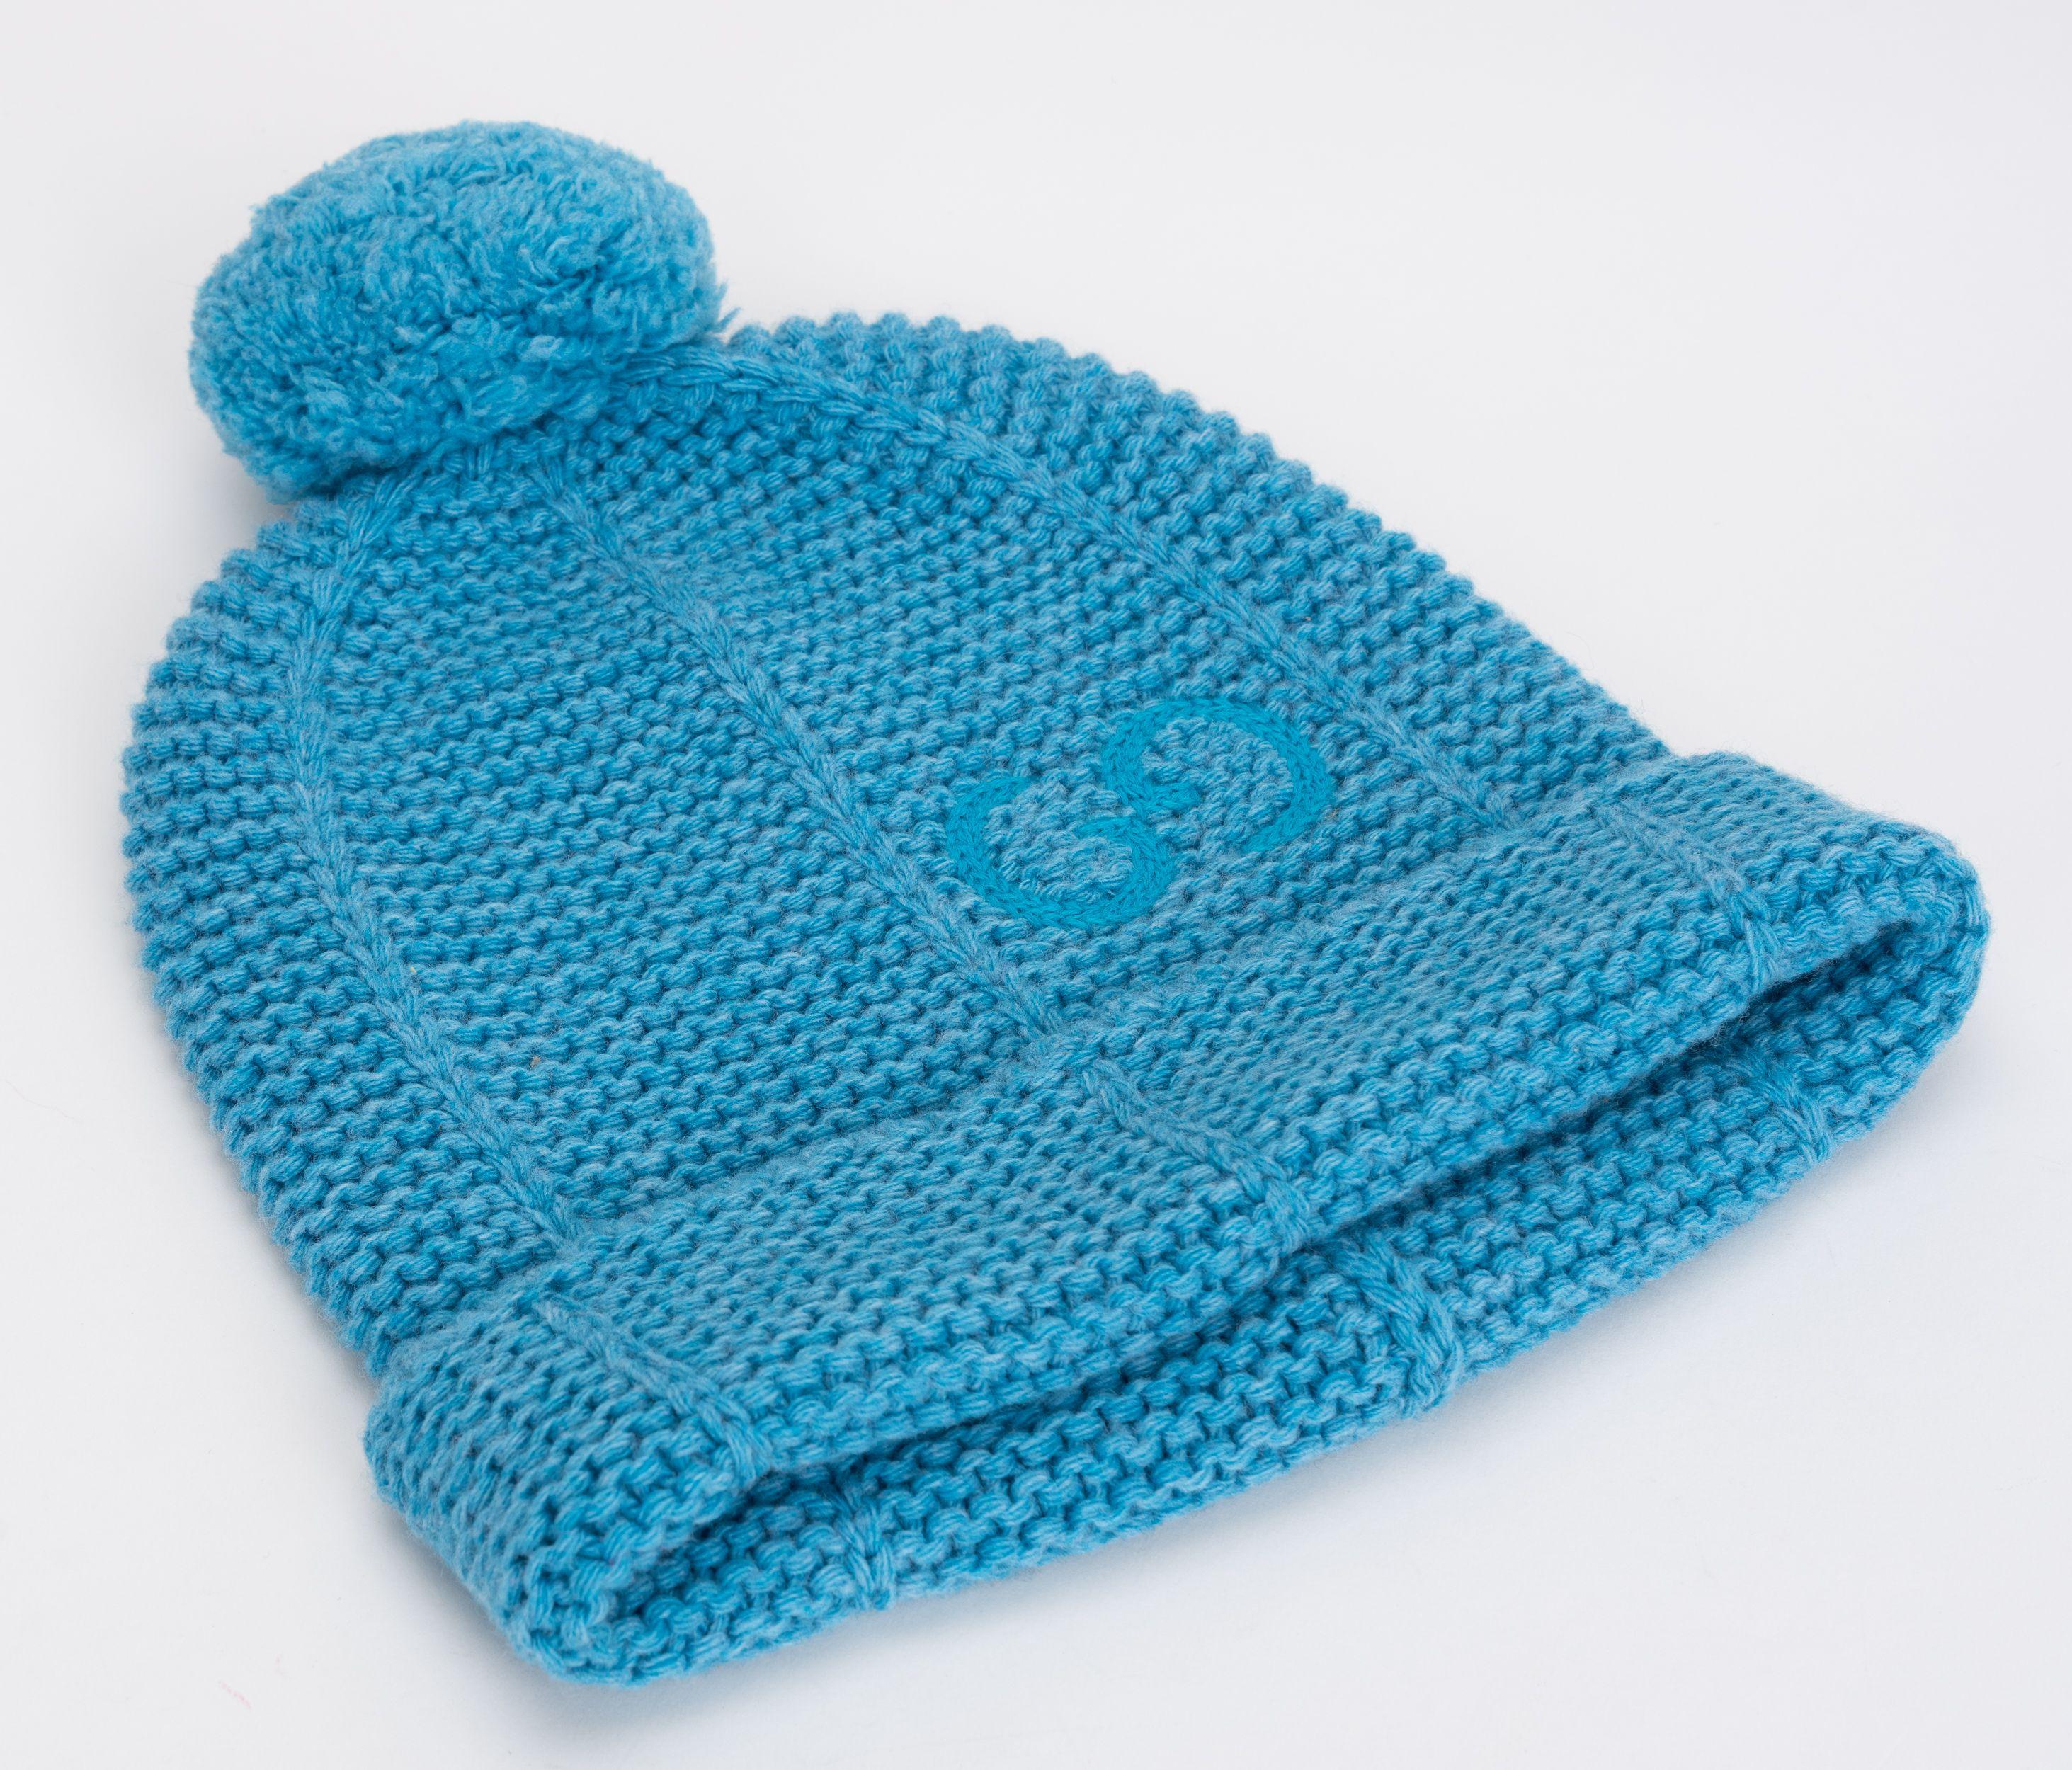 Gucci brand new unisex turquoise wool beanie, 100%wool, size large. Unworn condition.